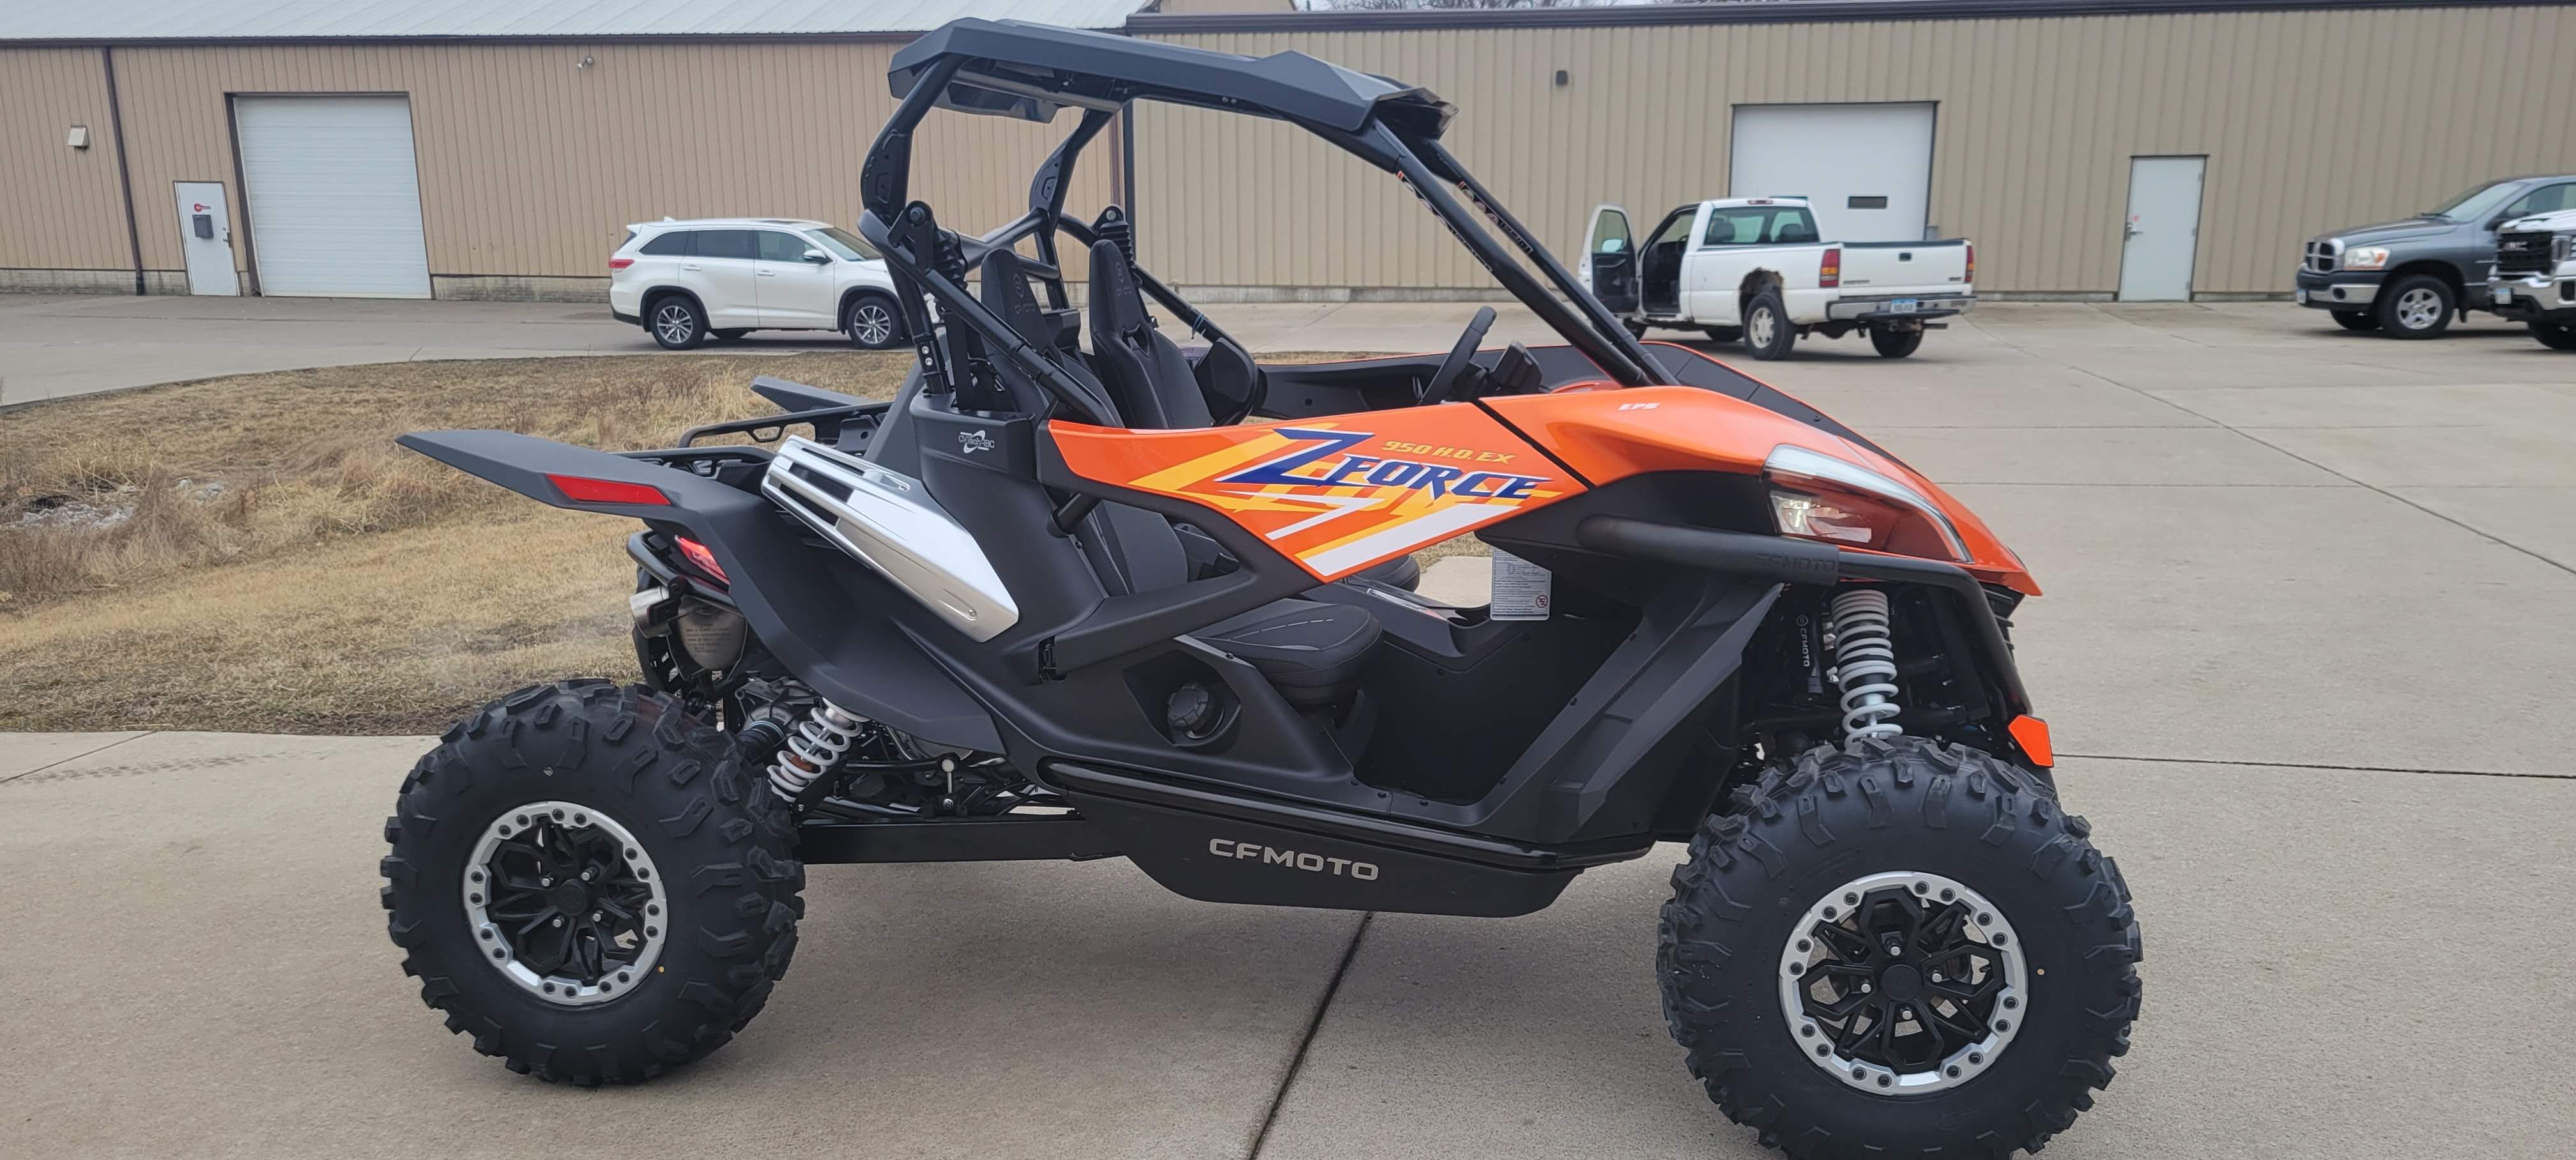 2022 CFMOTO ZFORCE 950 HO EX at Brenny's Motorcycle Clinic, Bettendorf, IA 52722